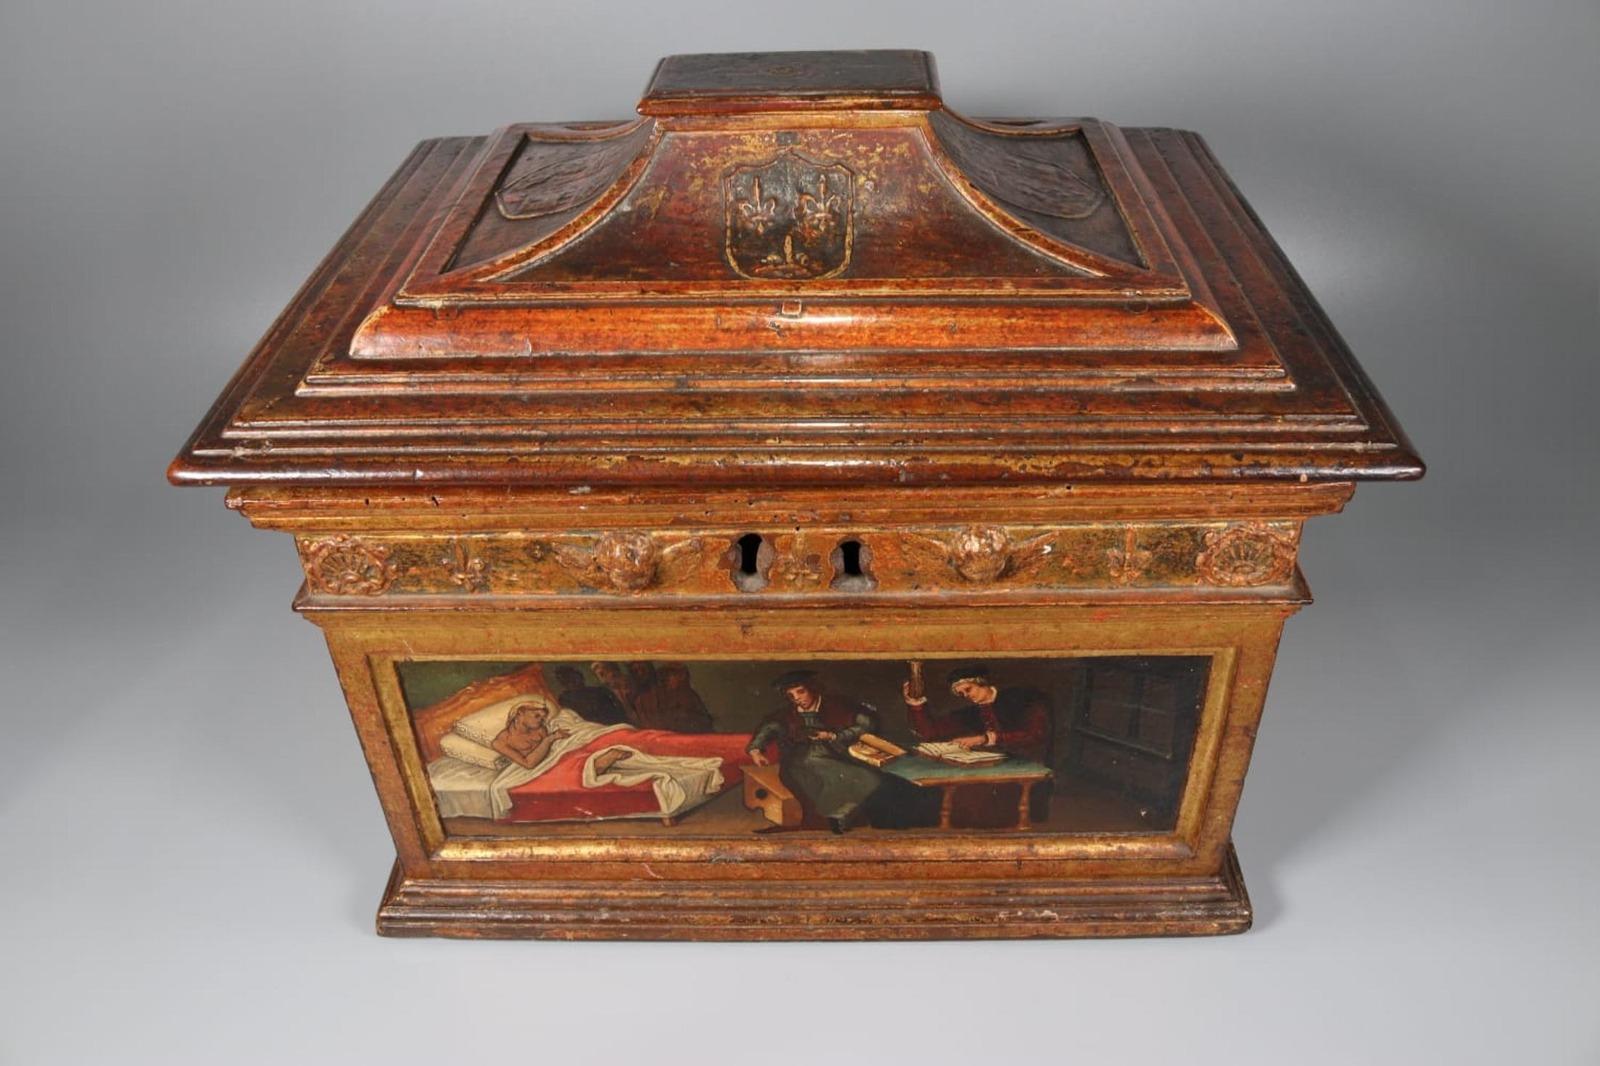 18th Century and Earlier Important Renaissance Medical Box Spanish or Italian Workshop, Around 1550 For Sale